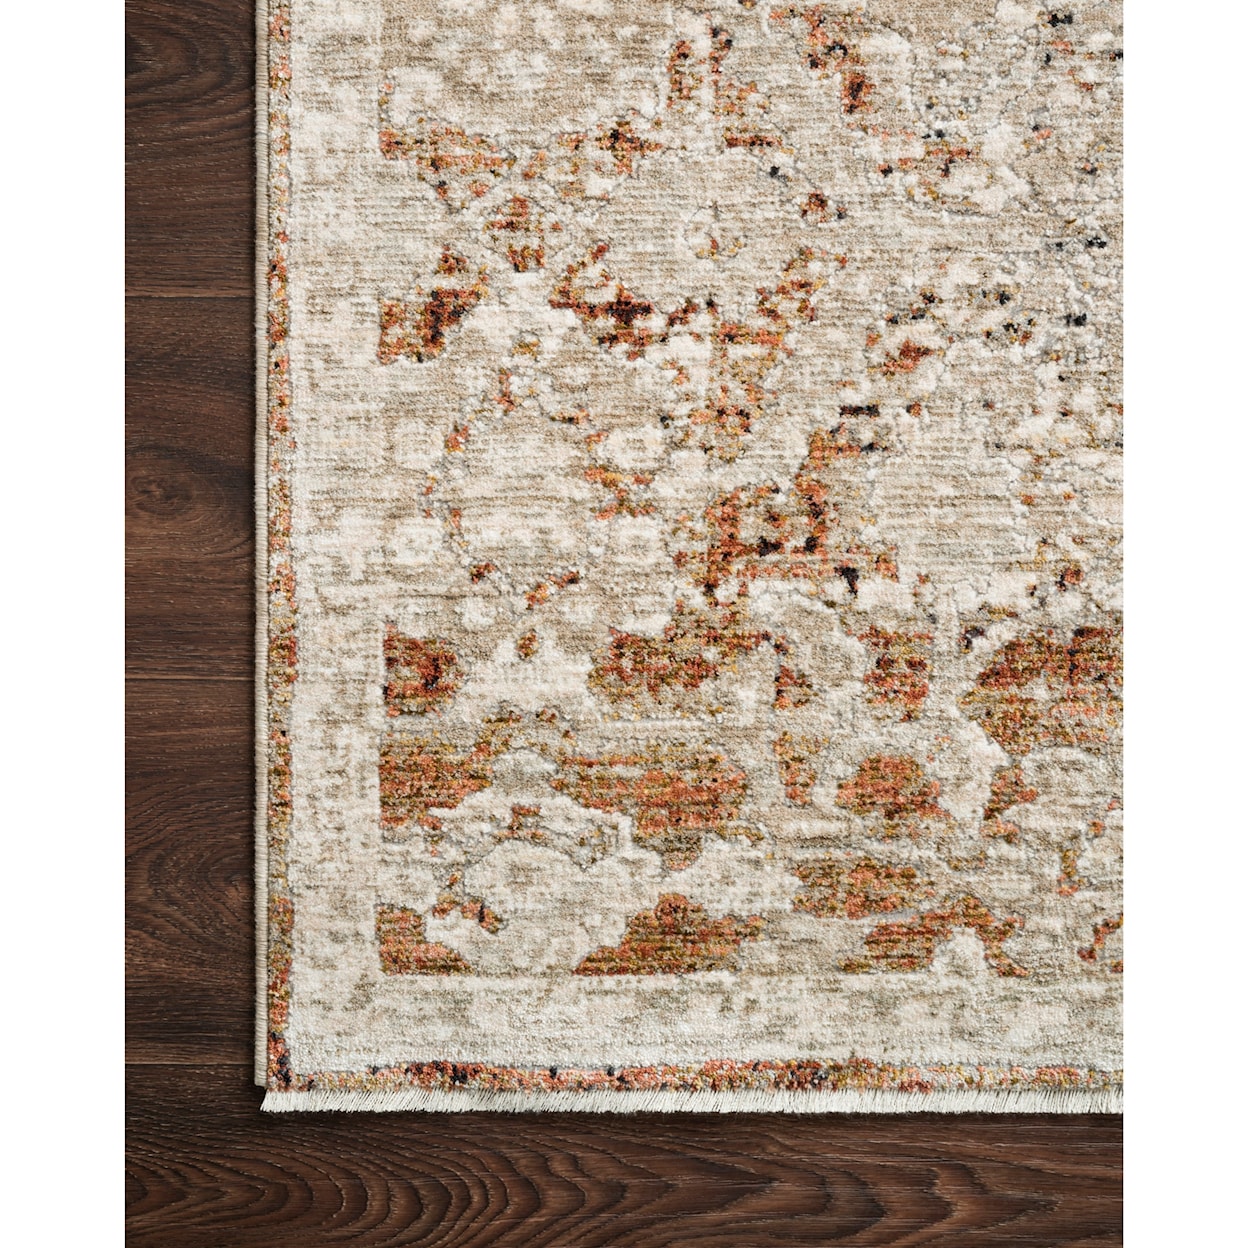 Reeds Rugs Theia 3'7" x 5'2" Natural / Rust Rug